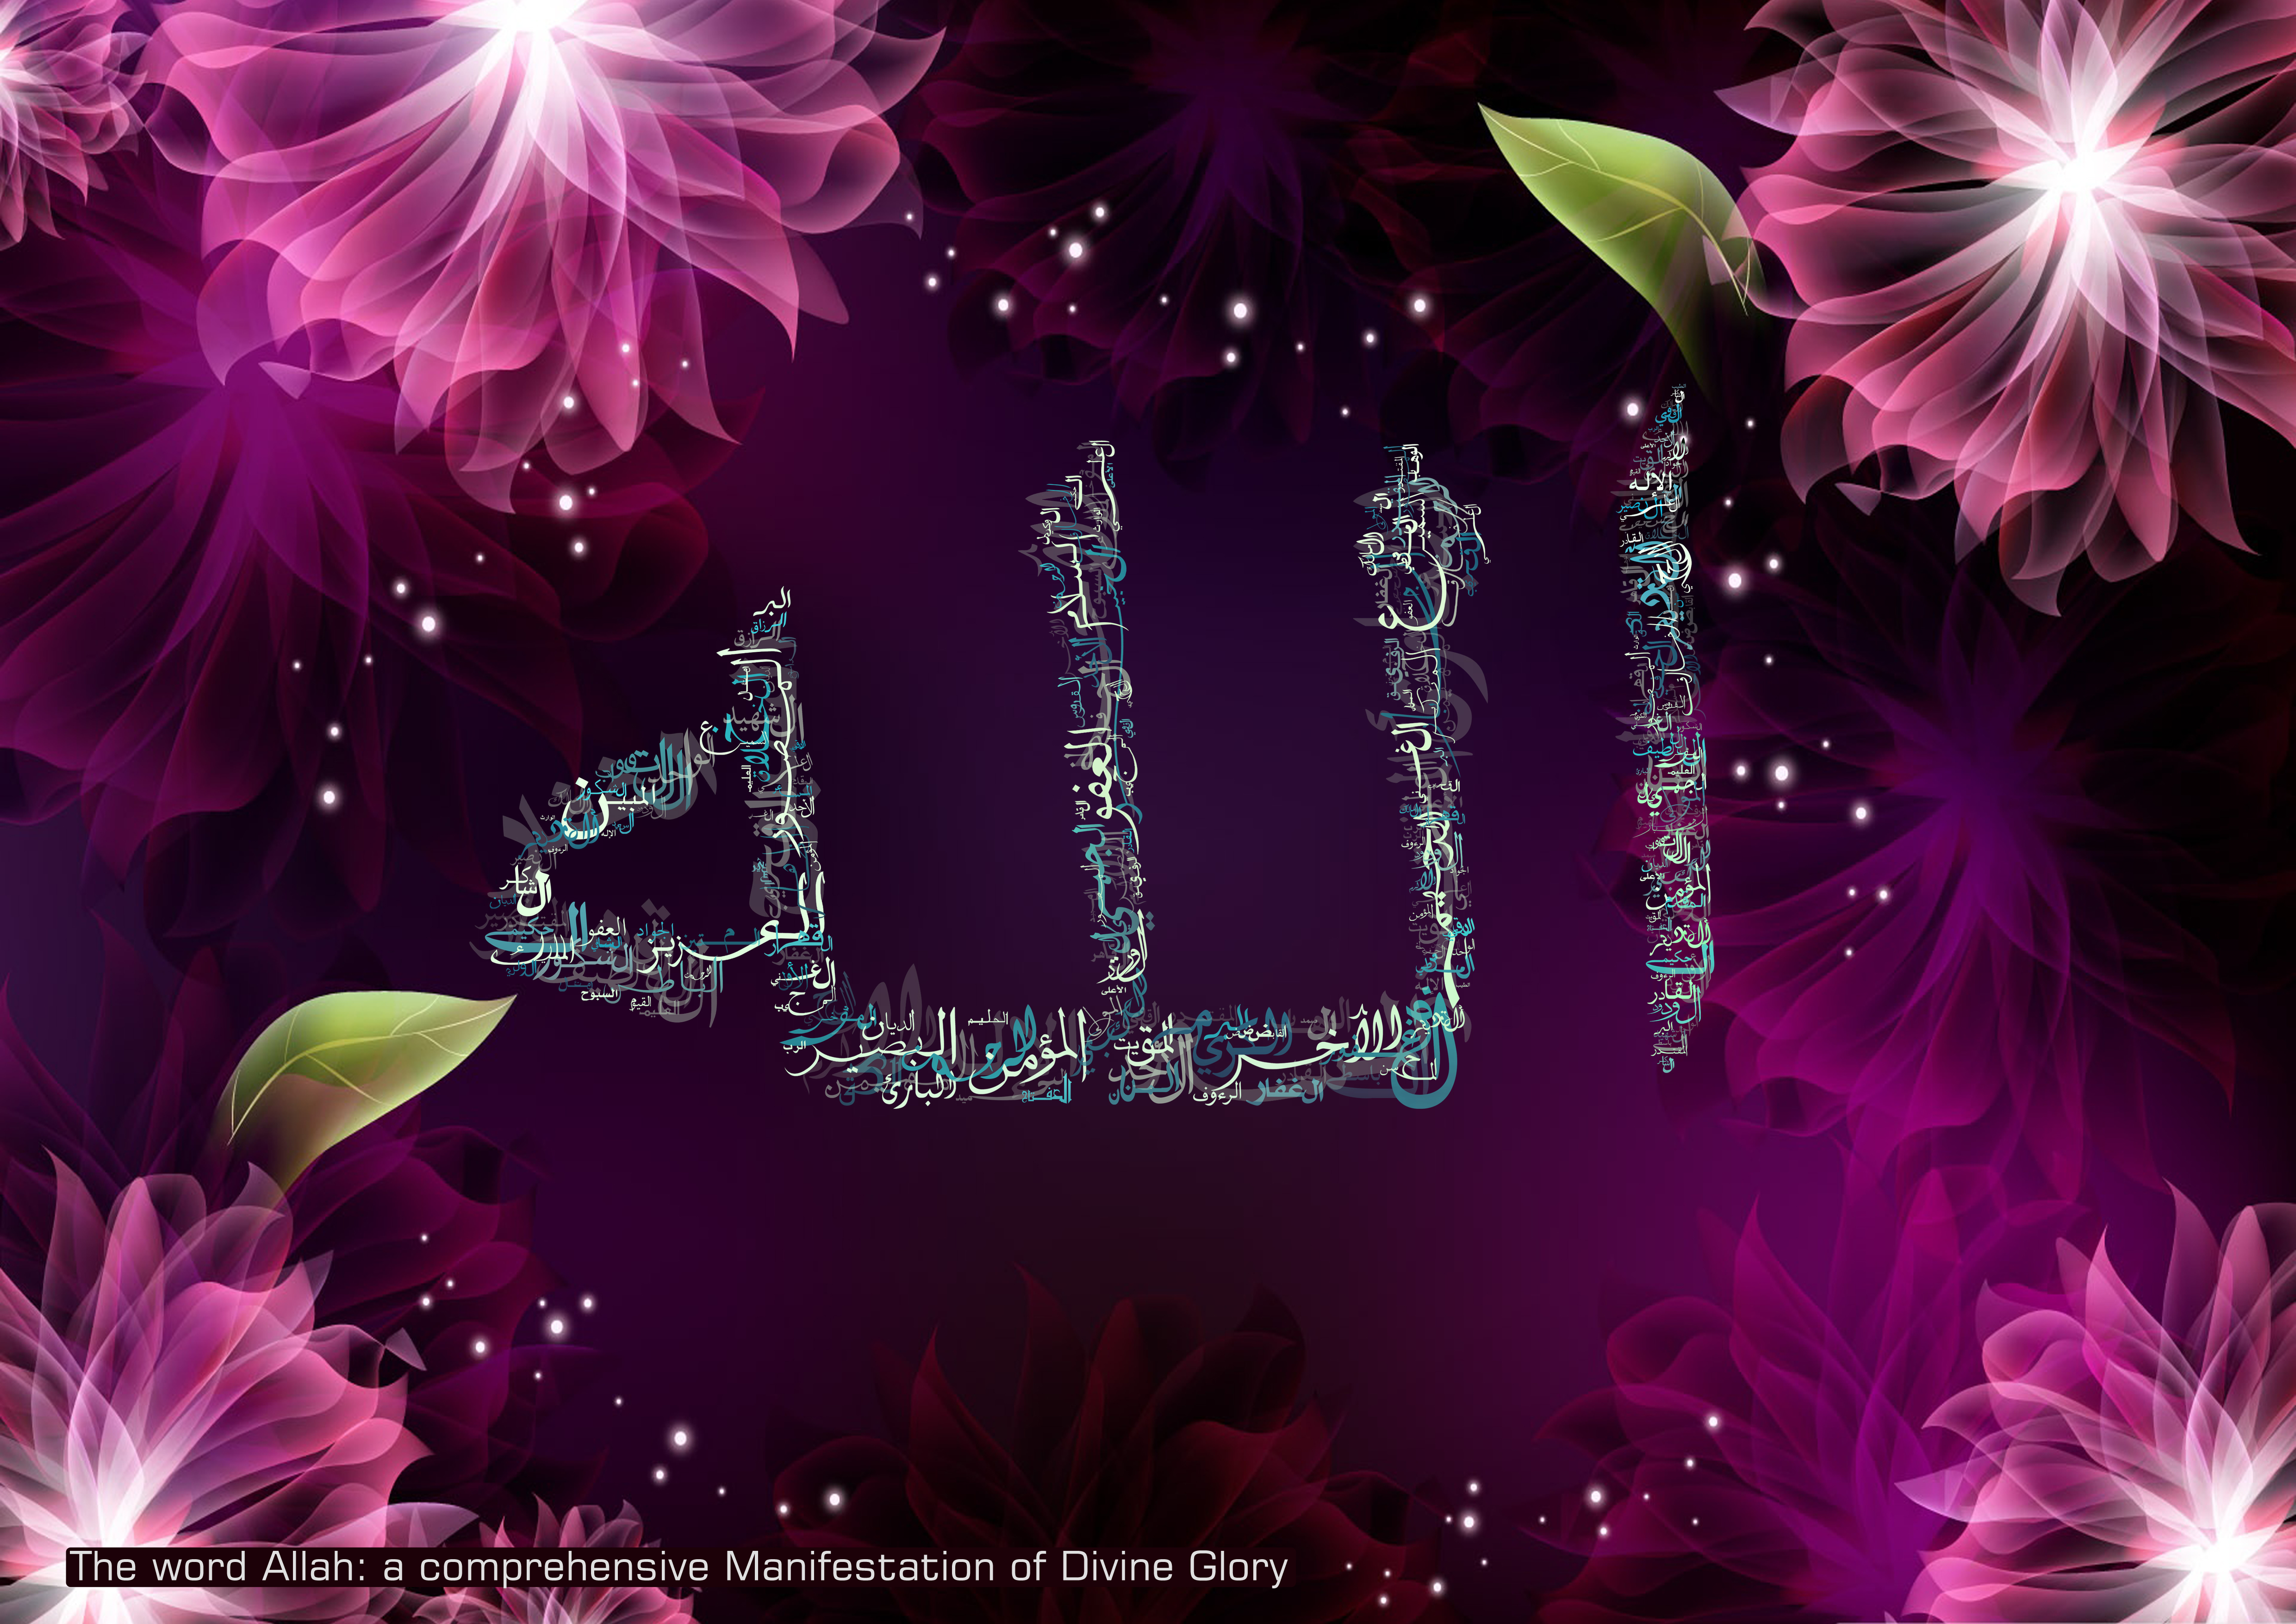 The word Allah:a comprehensive manifestation of Divine Glory